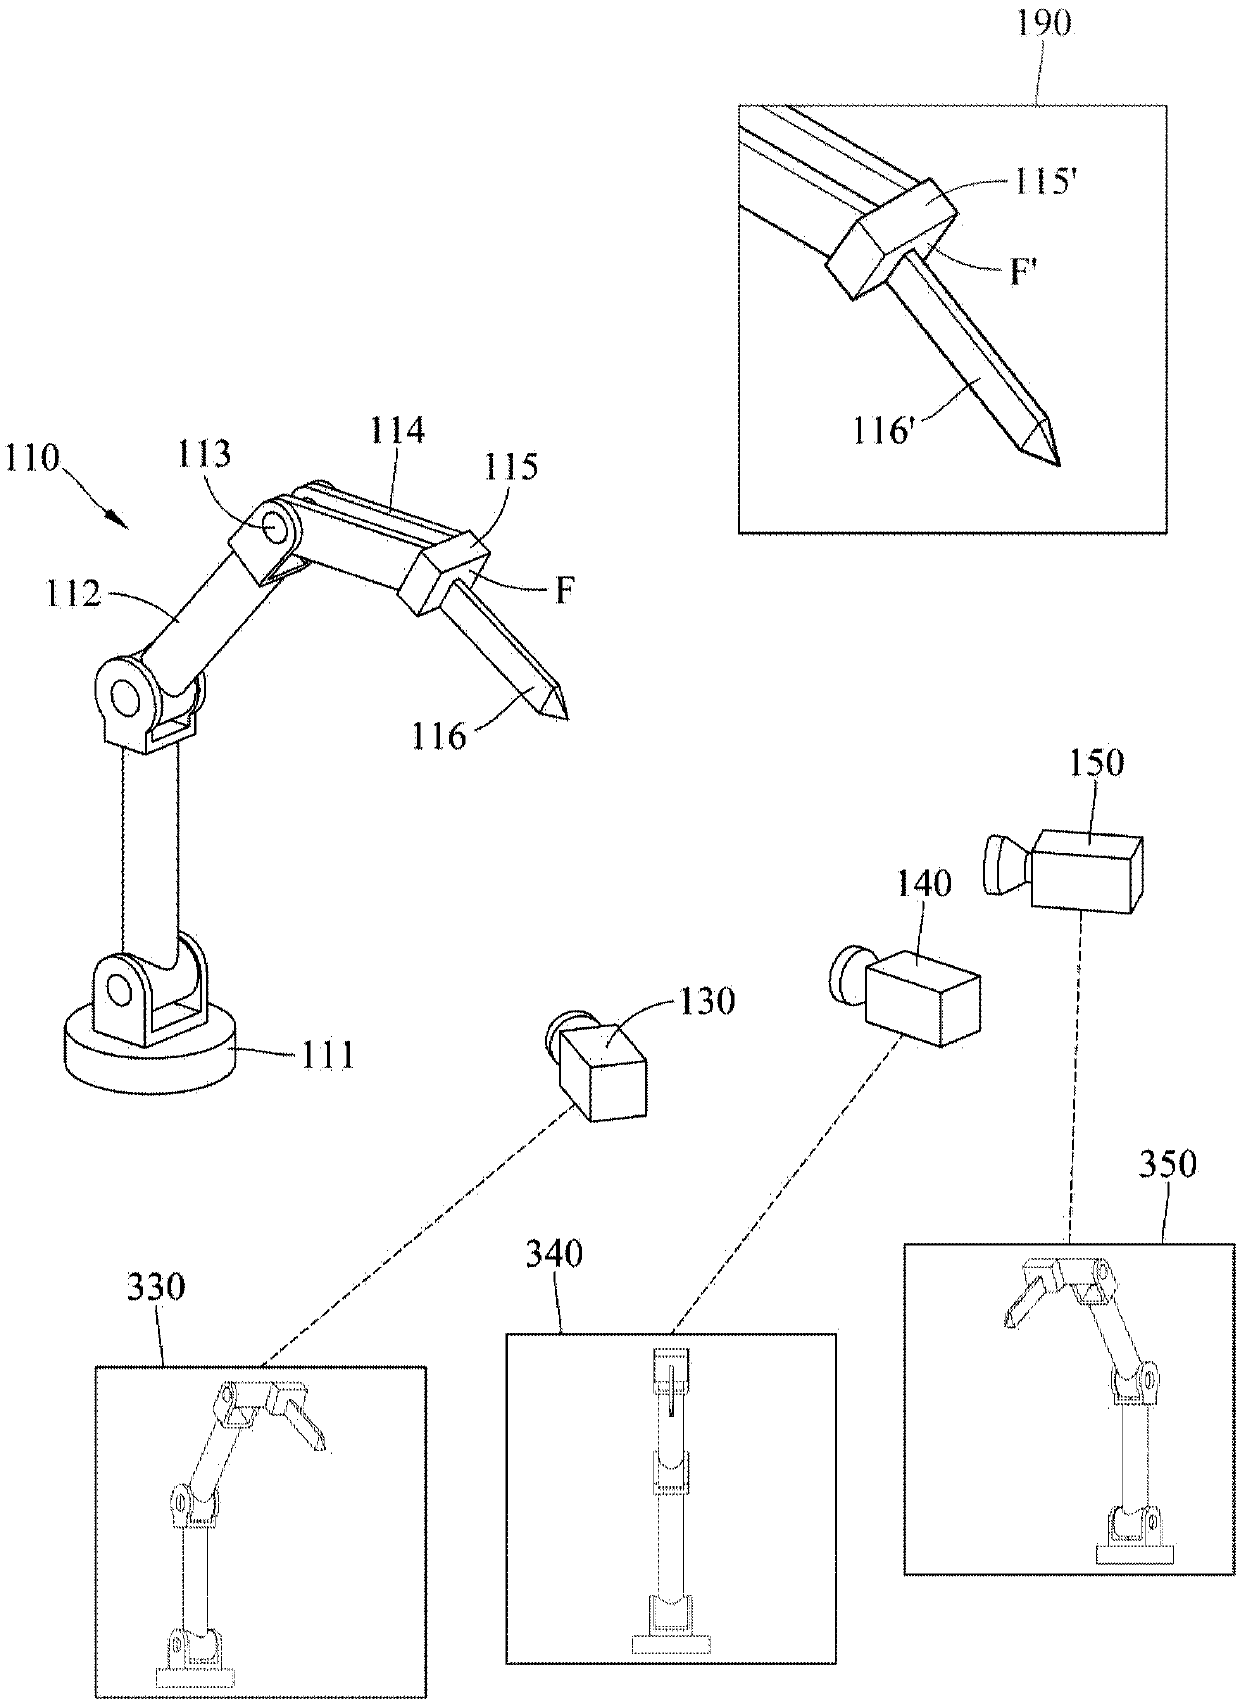 Method and apparatus of non-contact tool center point calibration for a mechanical arm, and a mechanical arm system with said calibration function